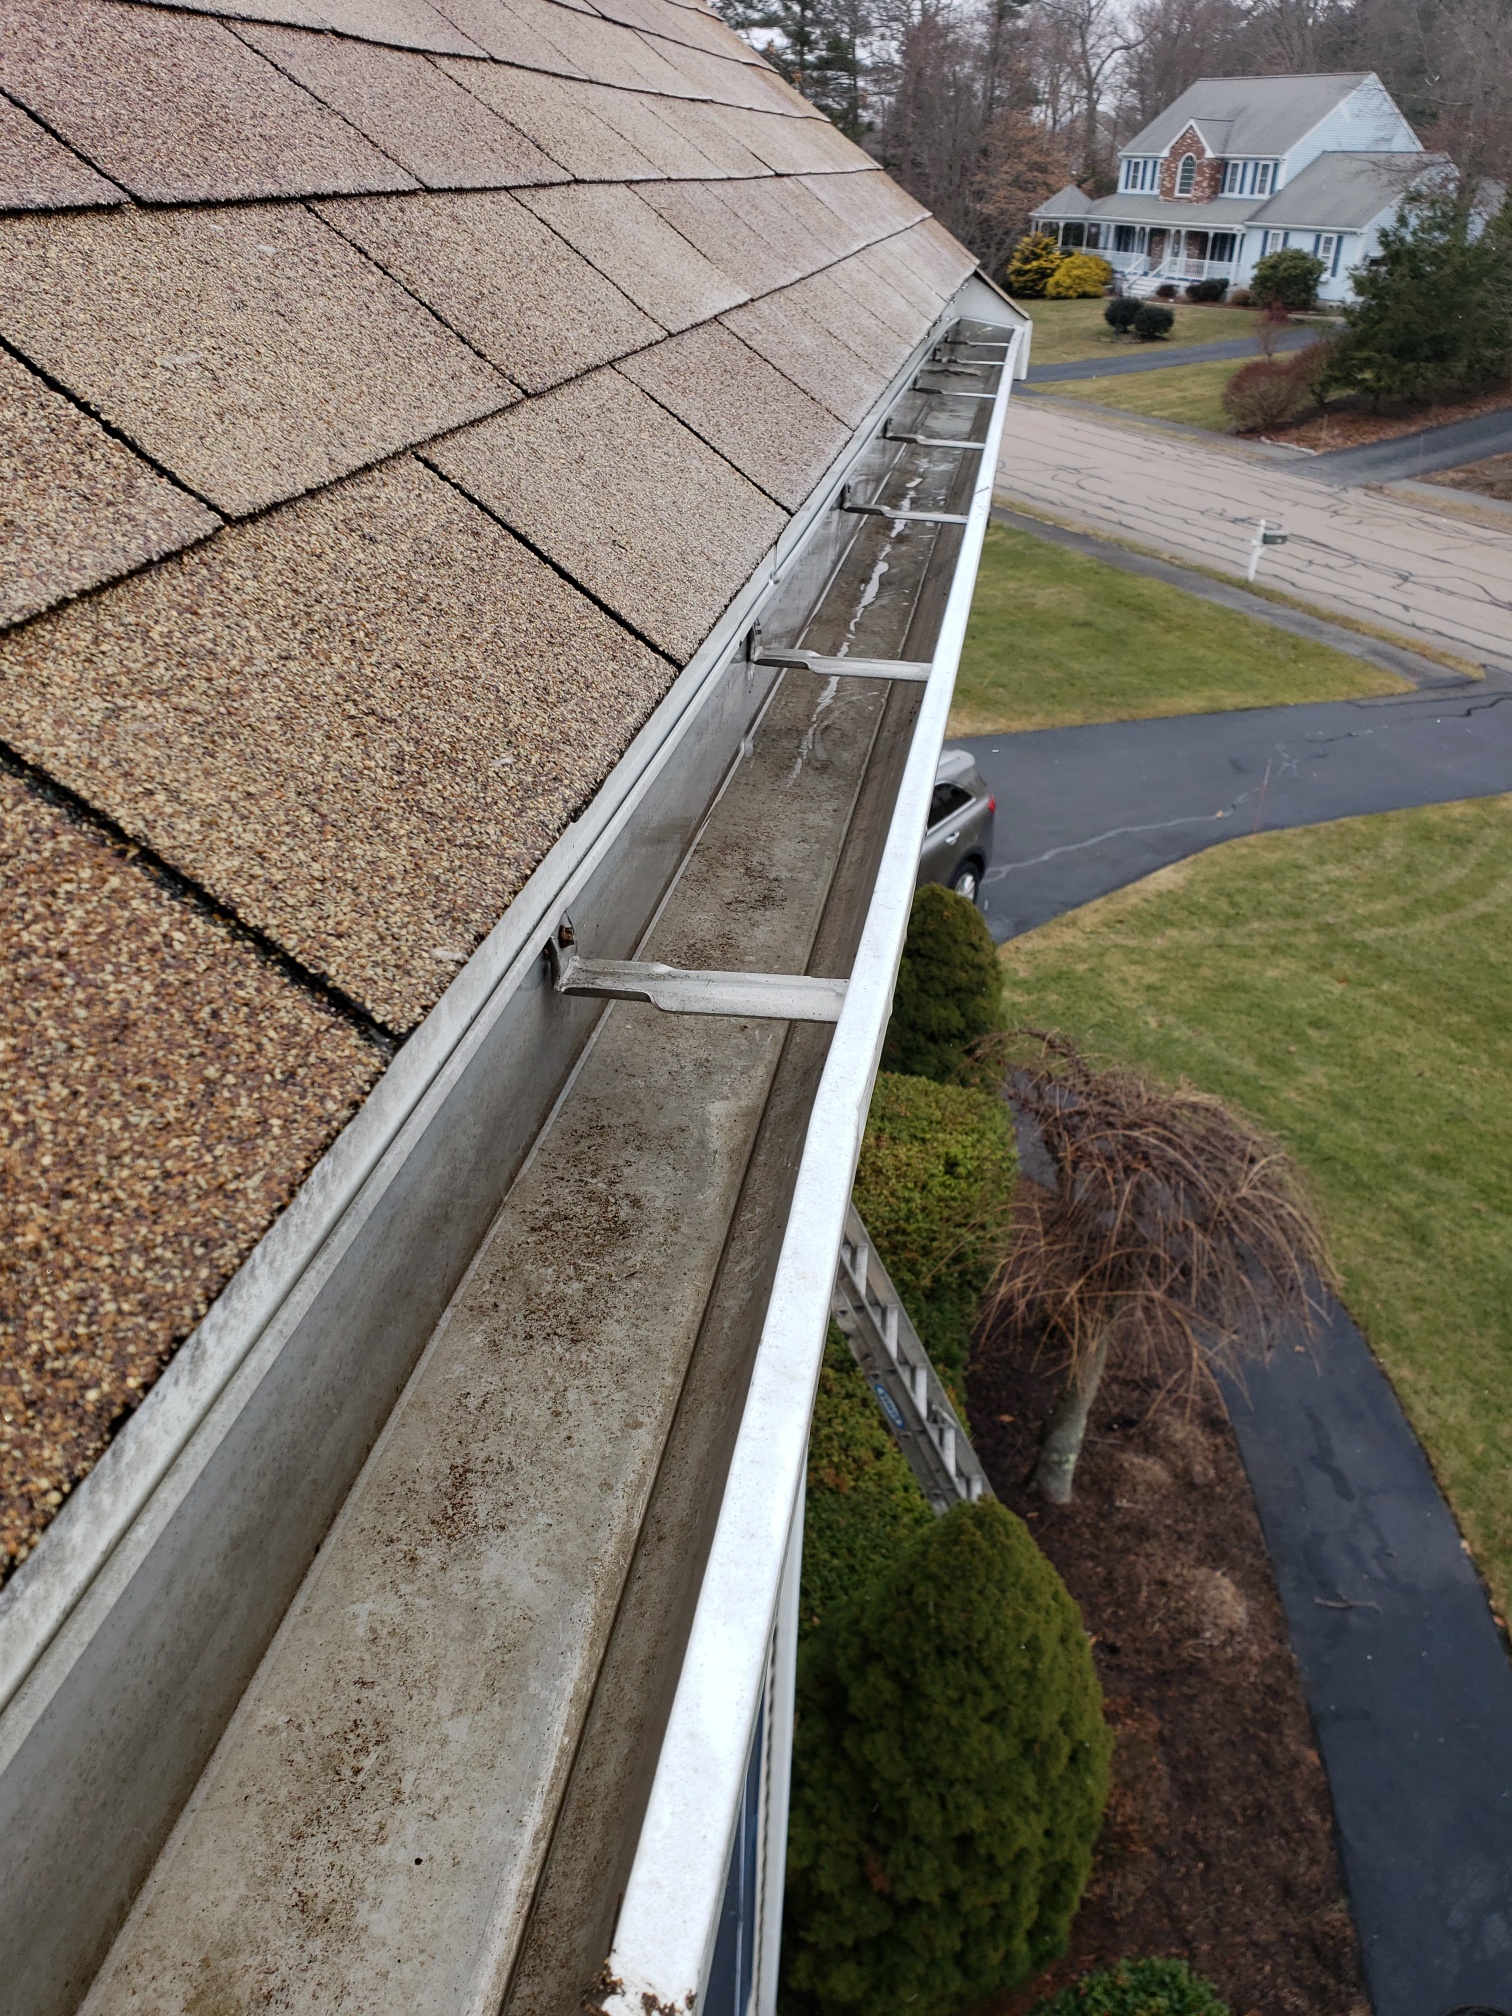 After a job well done in Pro Gutter Cleaning Melbourne